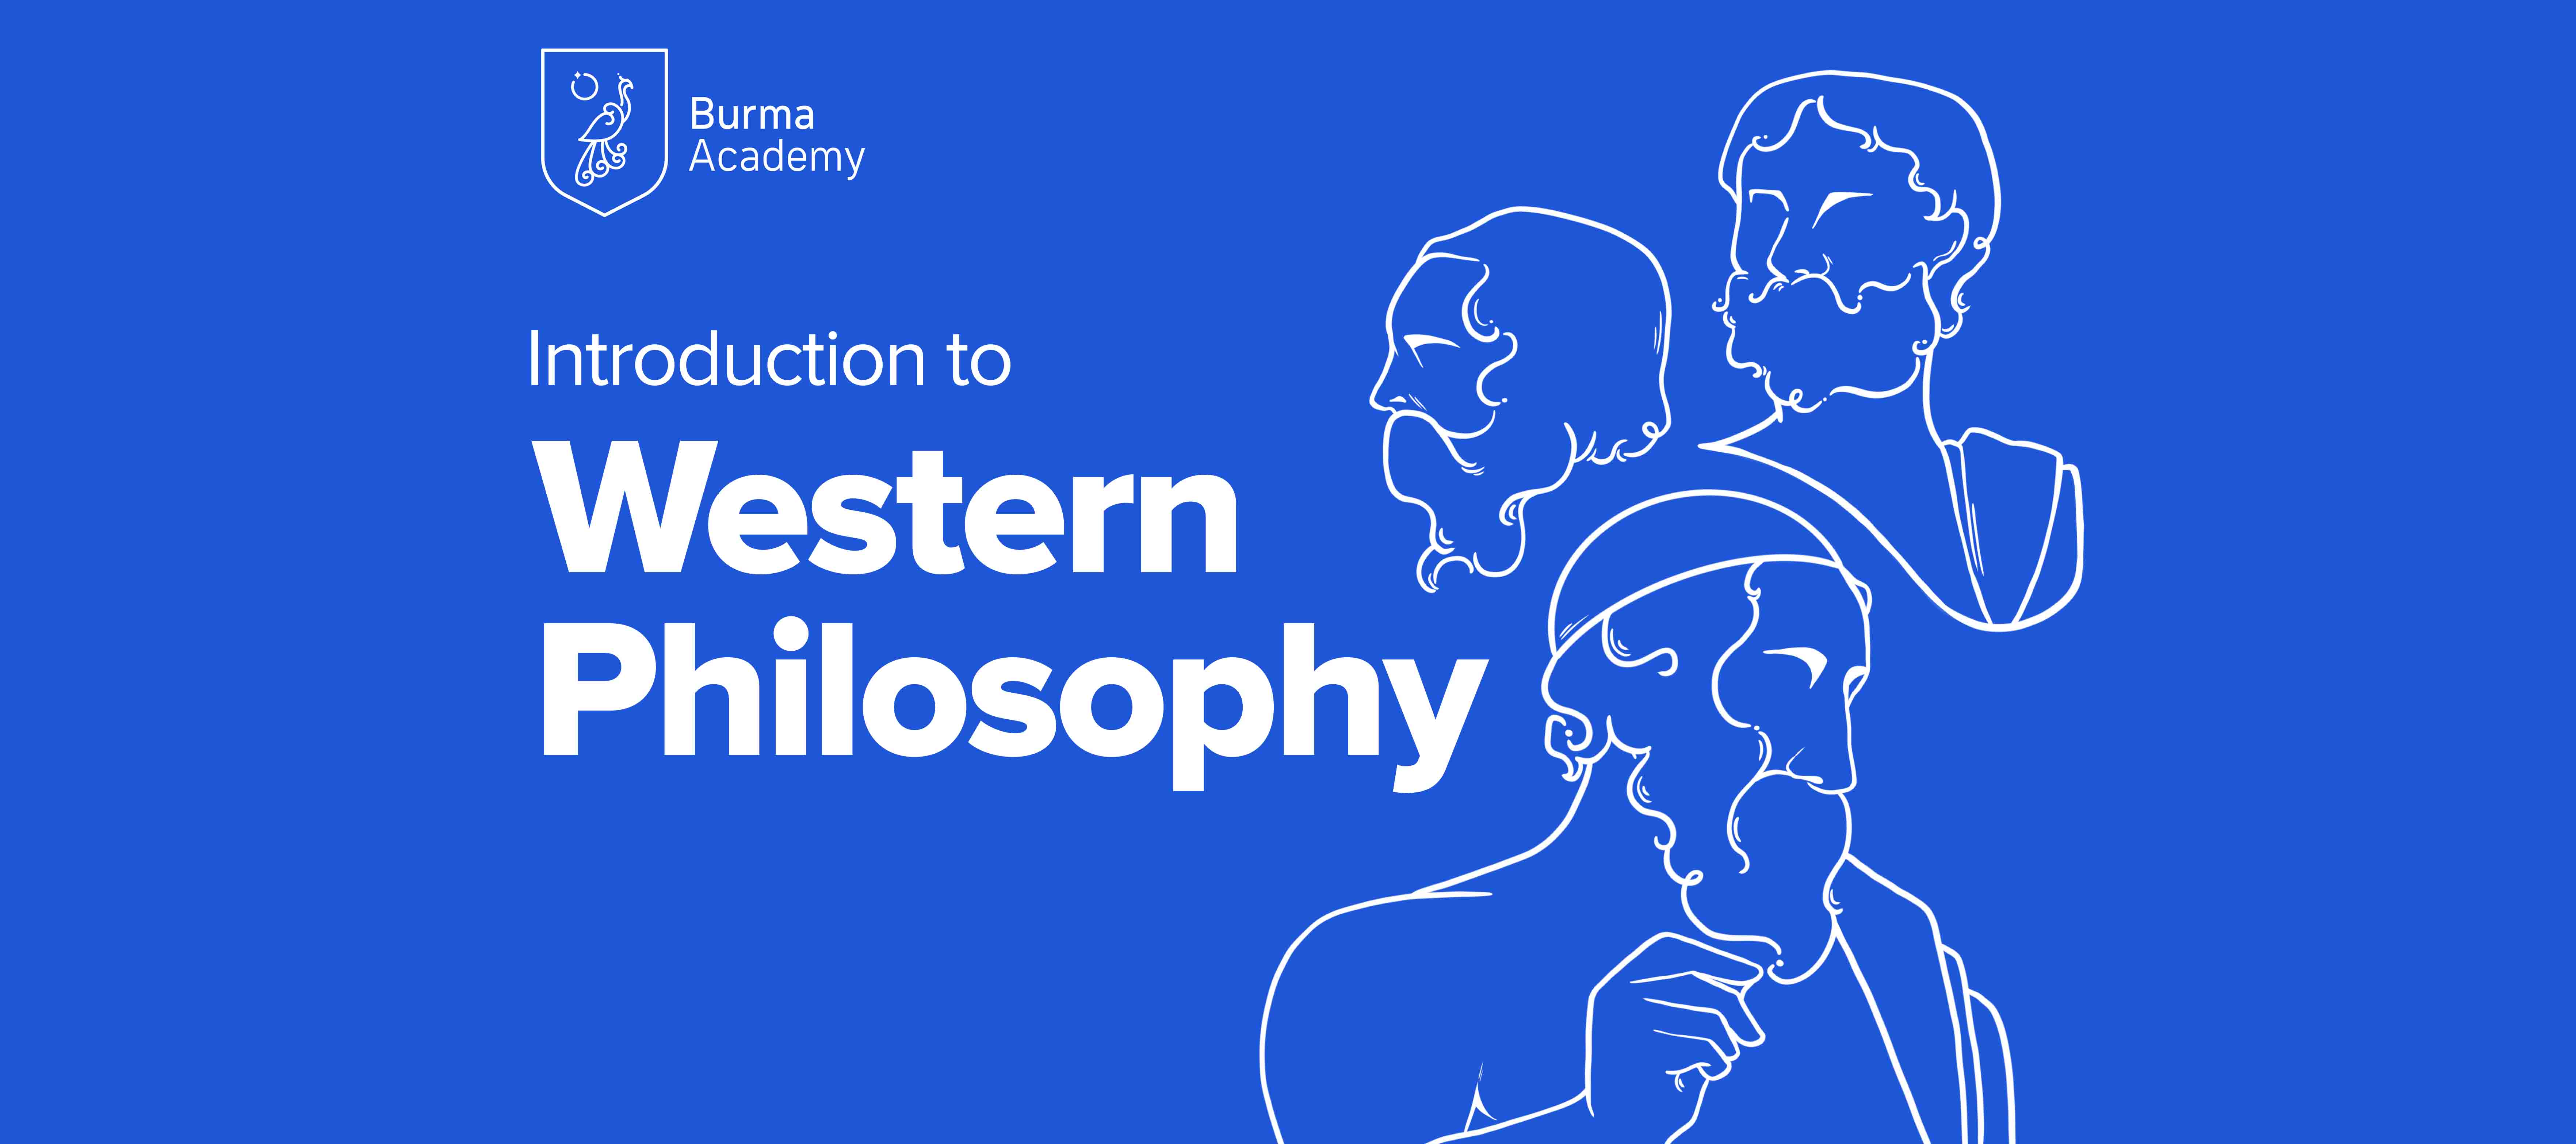 INTRODUCTION TO WESTERN PHILOSOPHY I BA025